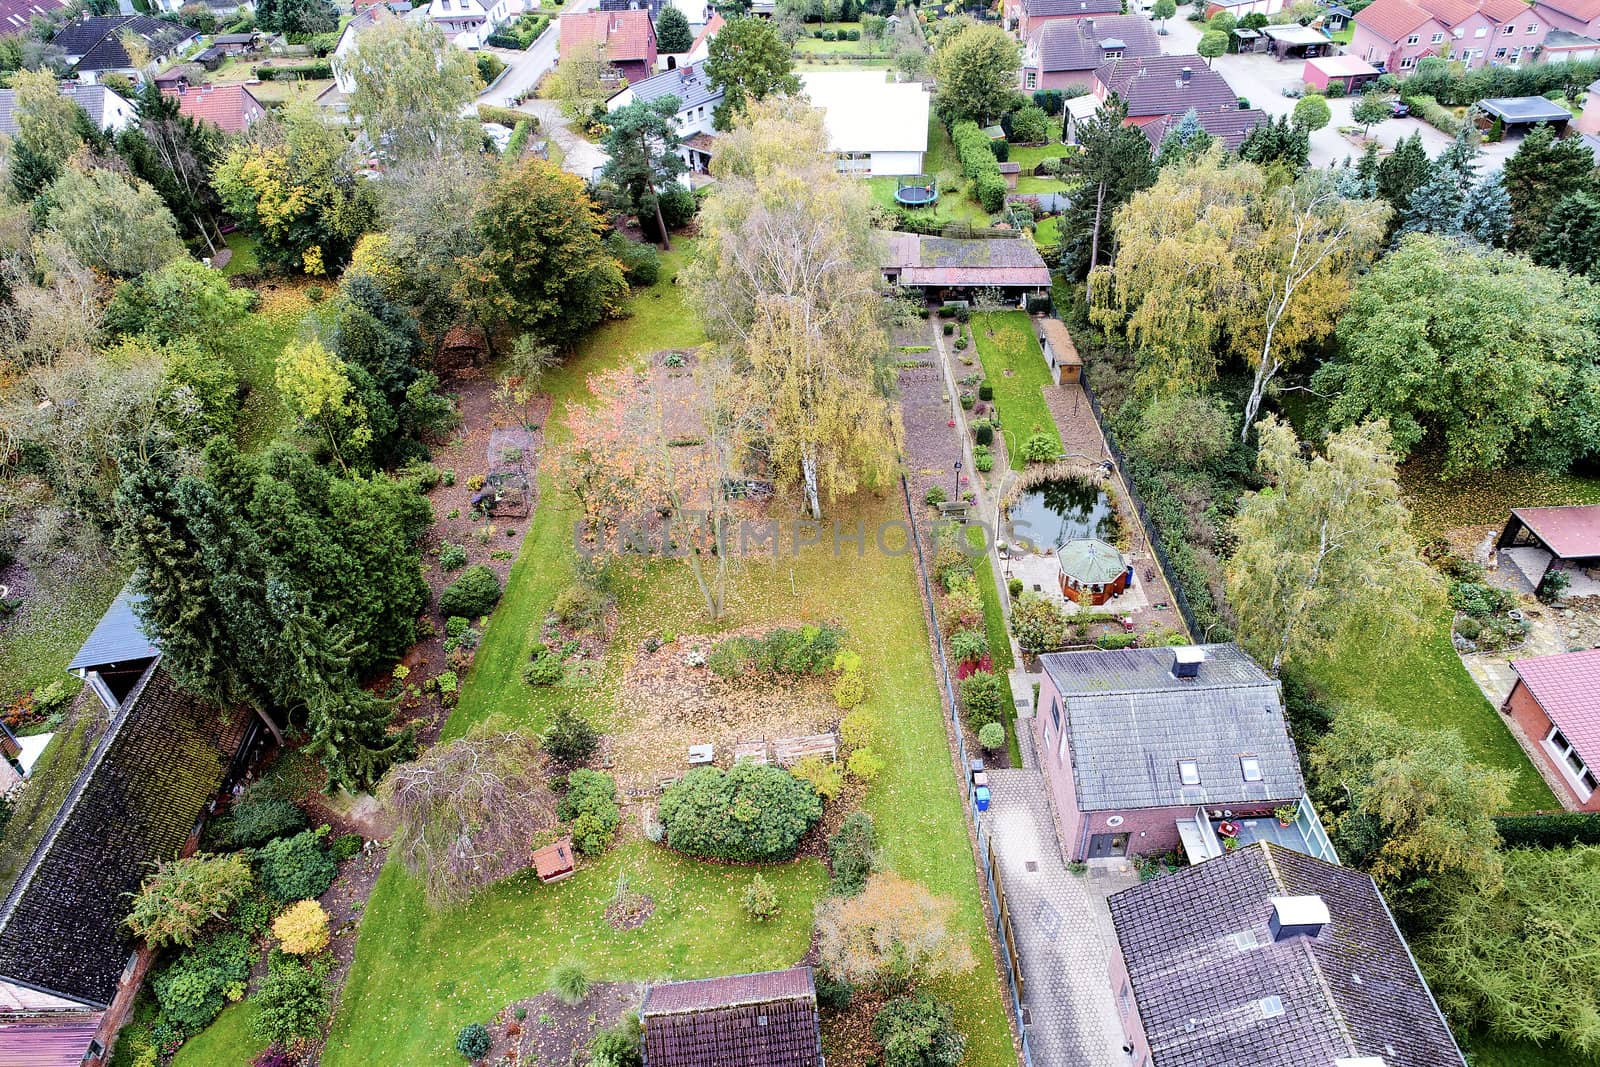 Aerial view of a large garden behind a detached house in a village in Germany